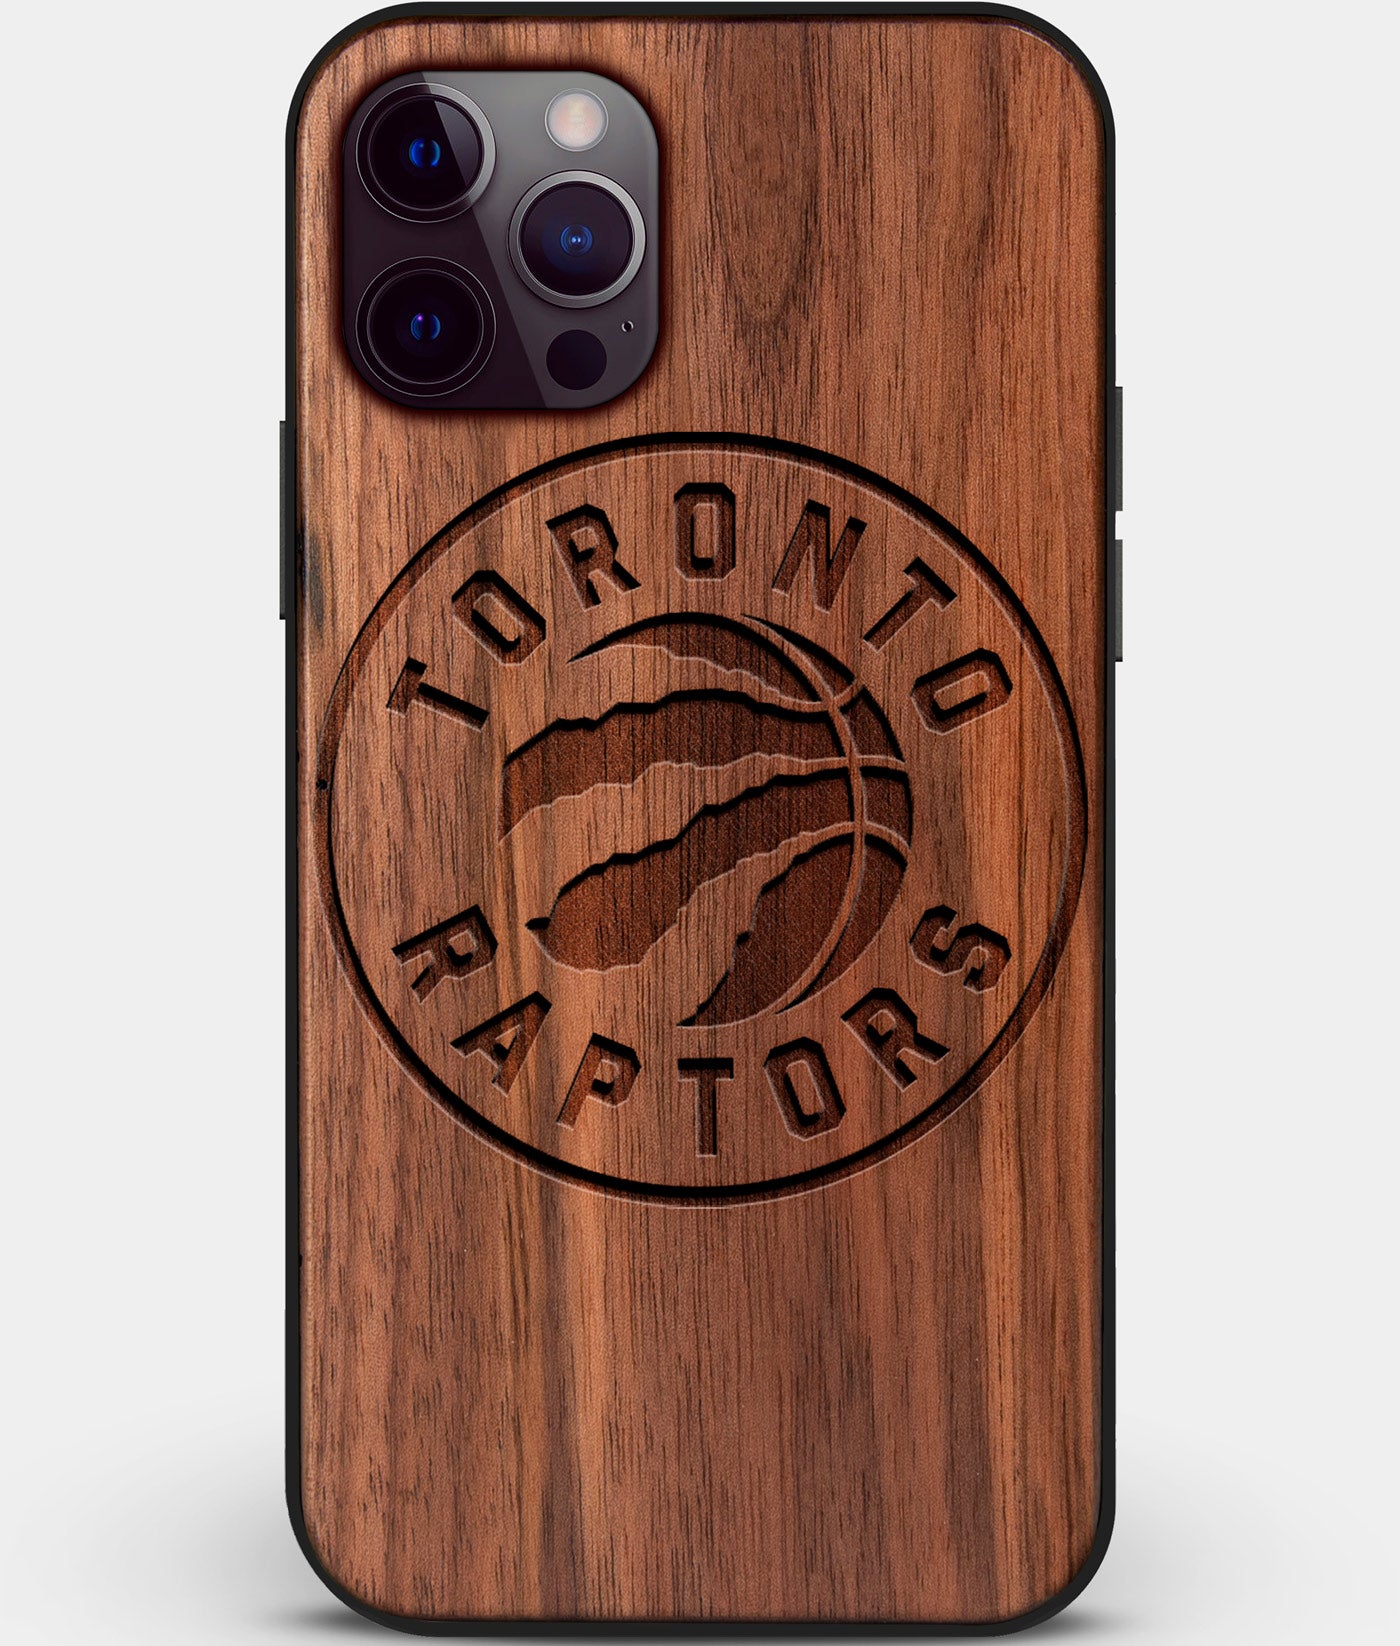 Custom Carved Wood Toronto Raptors iPhone 12 Pro Case | Personalized Walnut Wood Toronto Raptors Cover, Birthday Gift, Gifts For Him, Monogrammed Gift For Fan | by Engraved In Nature